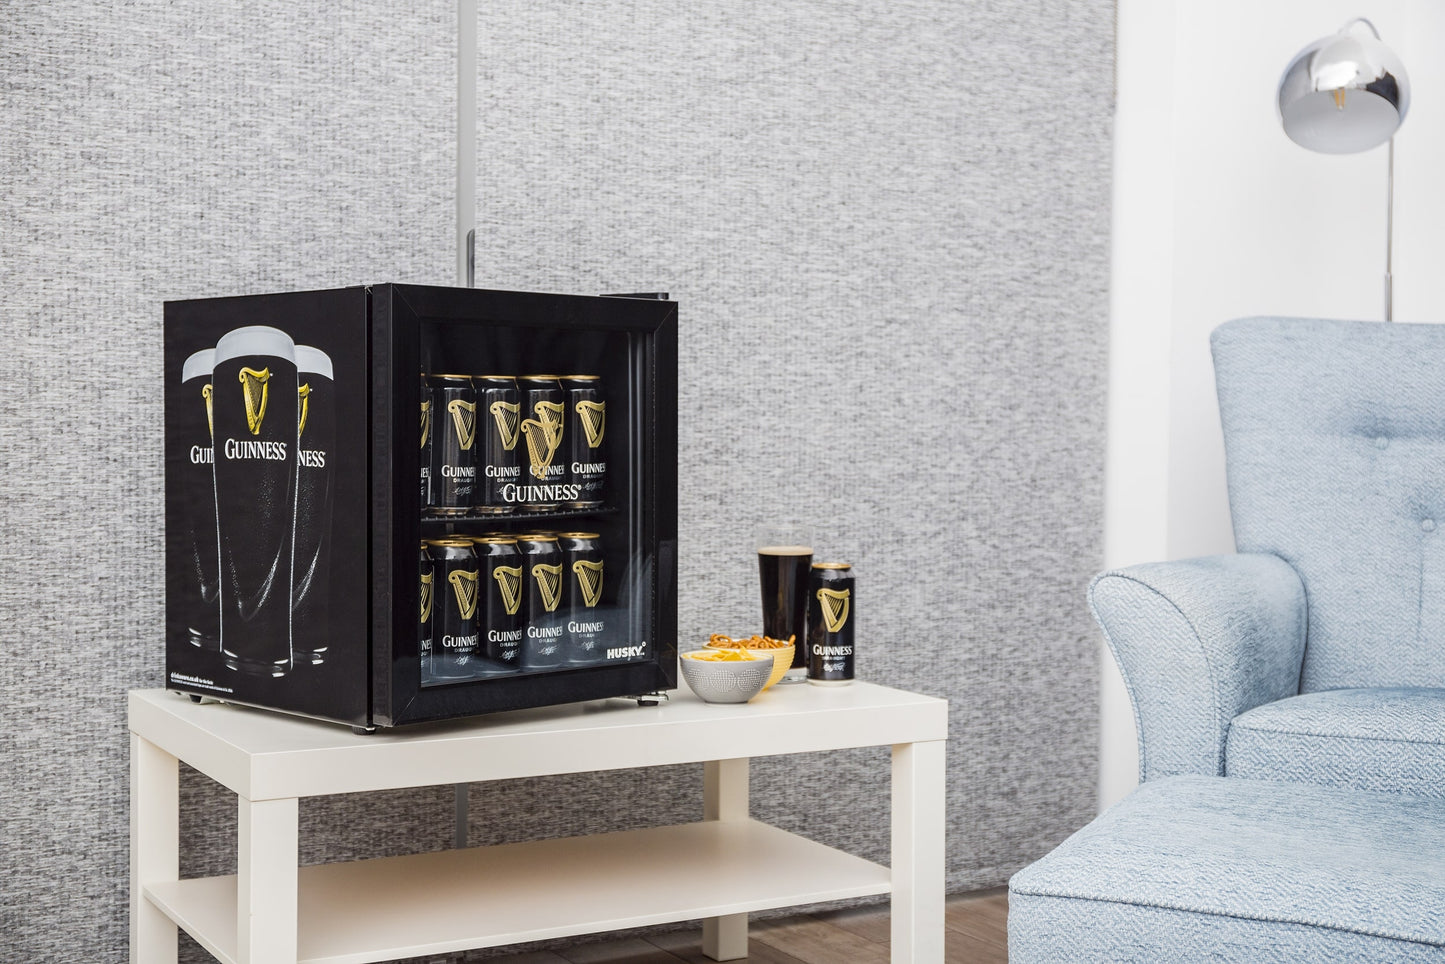 A Guinness Fridge with Guinness beer in it, iconic stout brews chilled, sitting on a table in a living room.